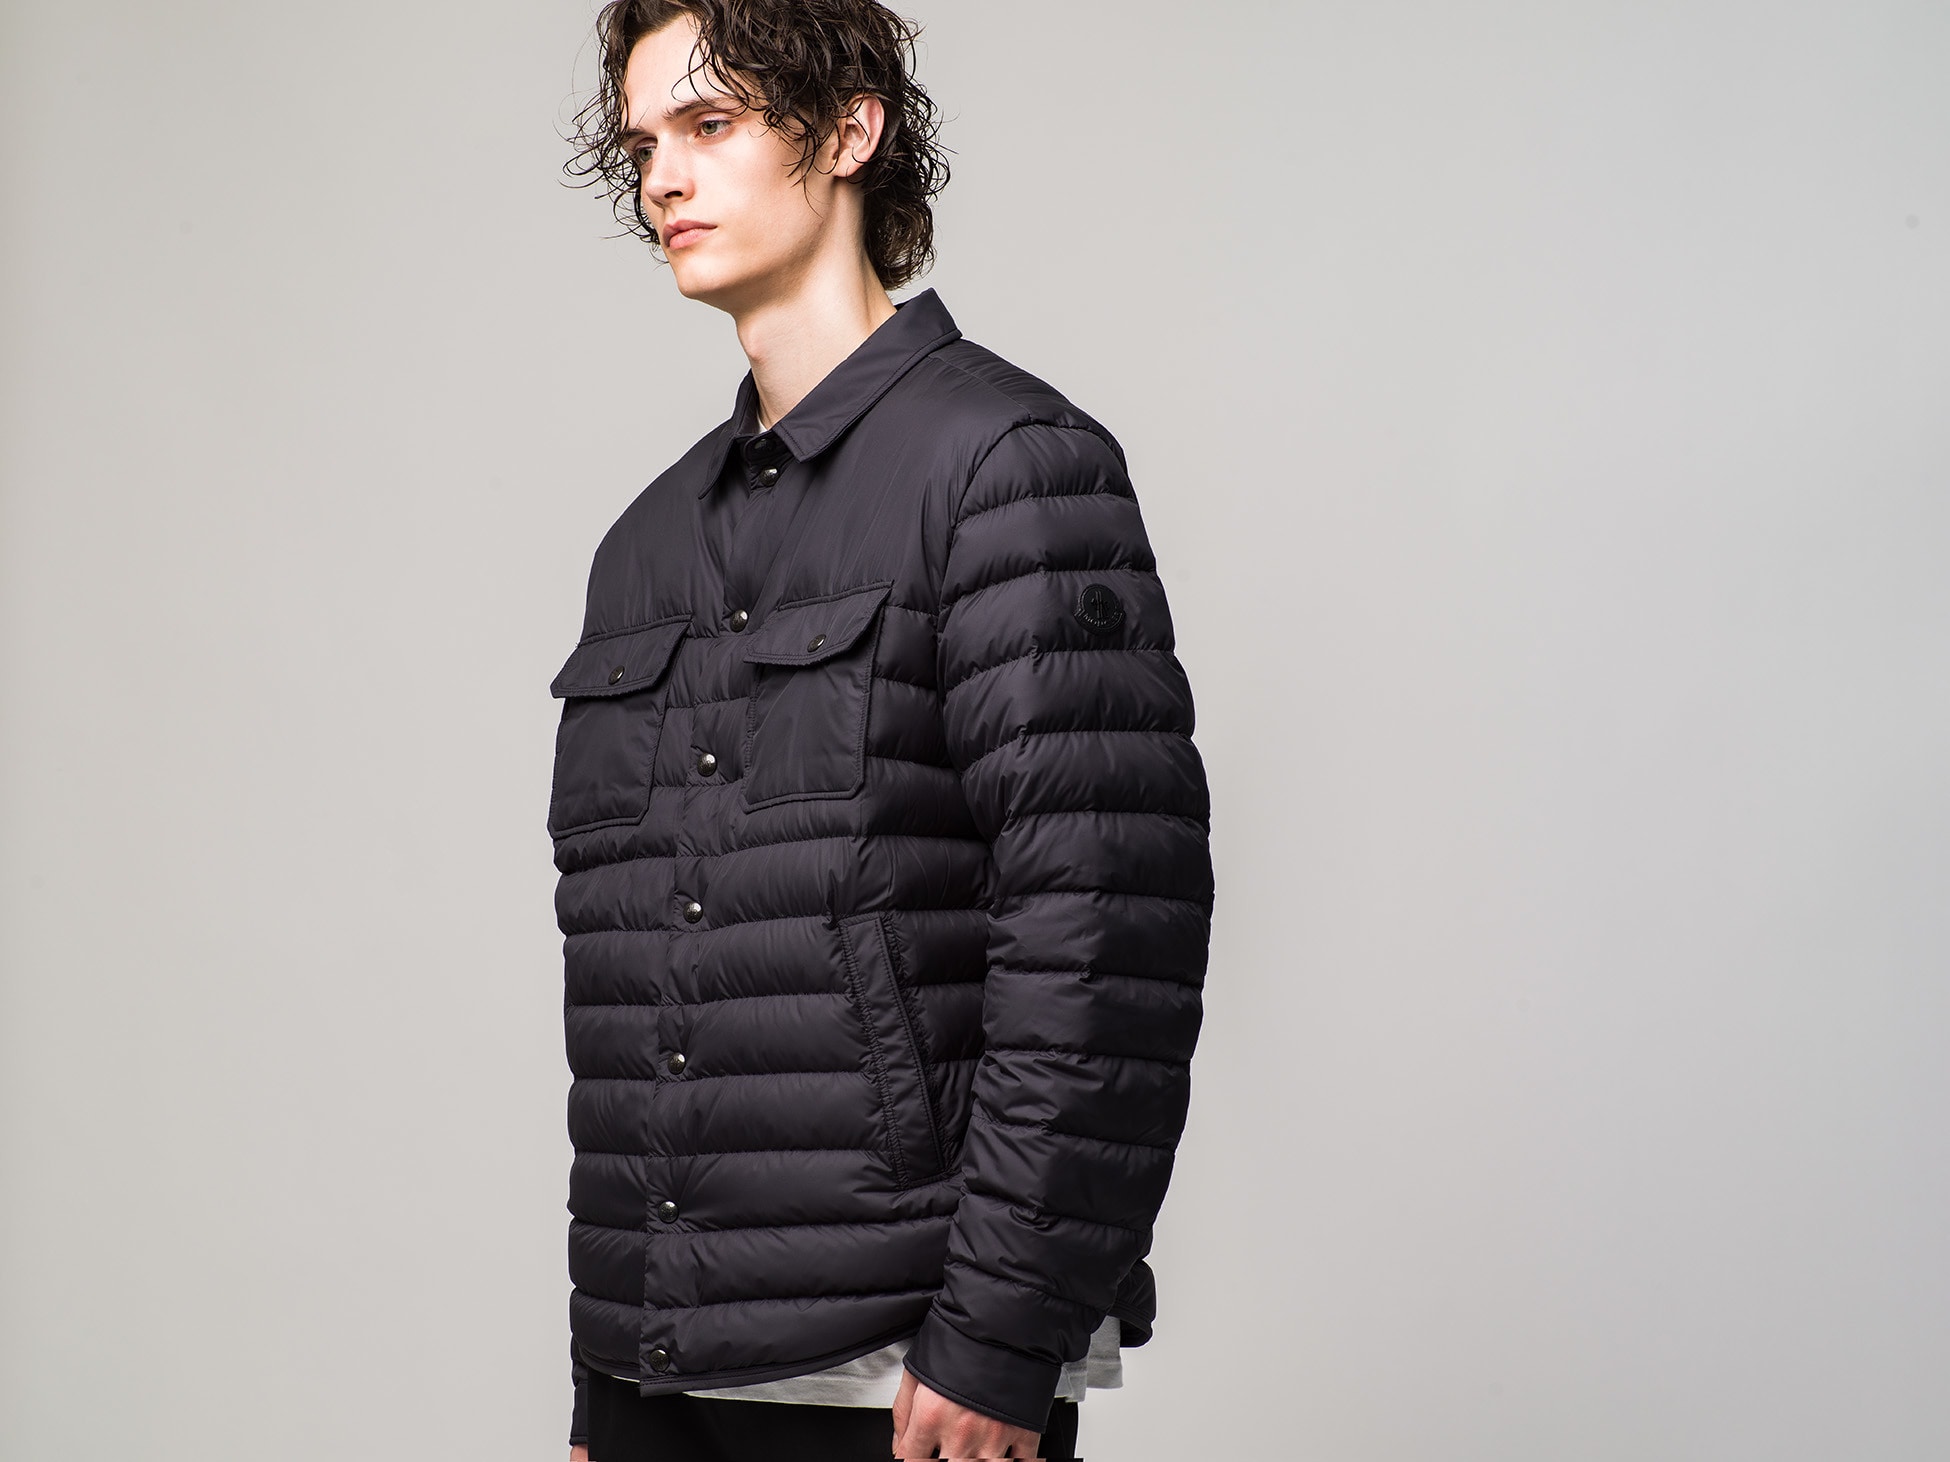 MONCLER Exclusive for Ron Herman SANARY JACKET 8.27(Sat) New Arrival